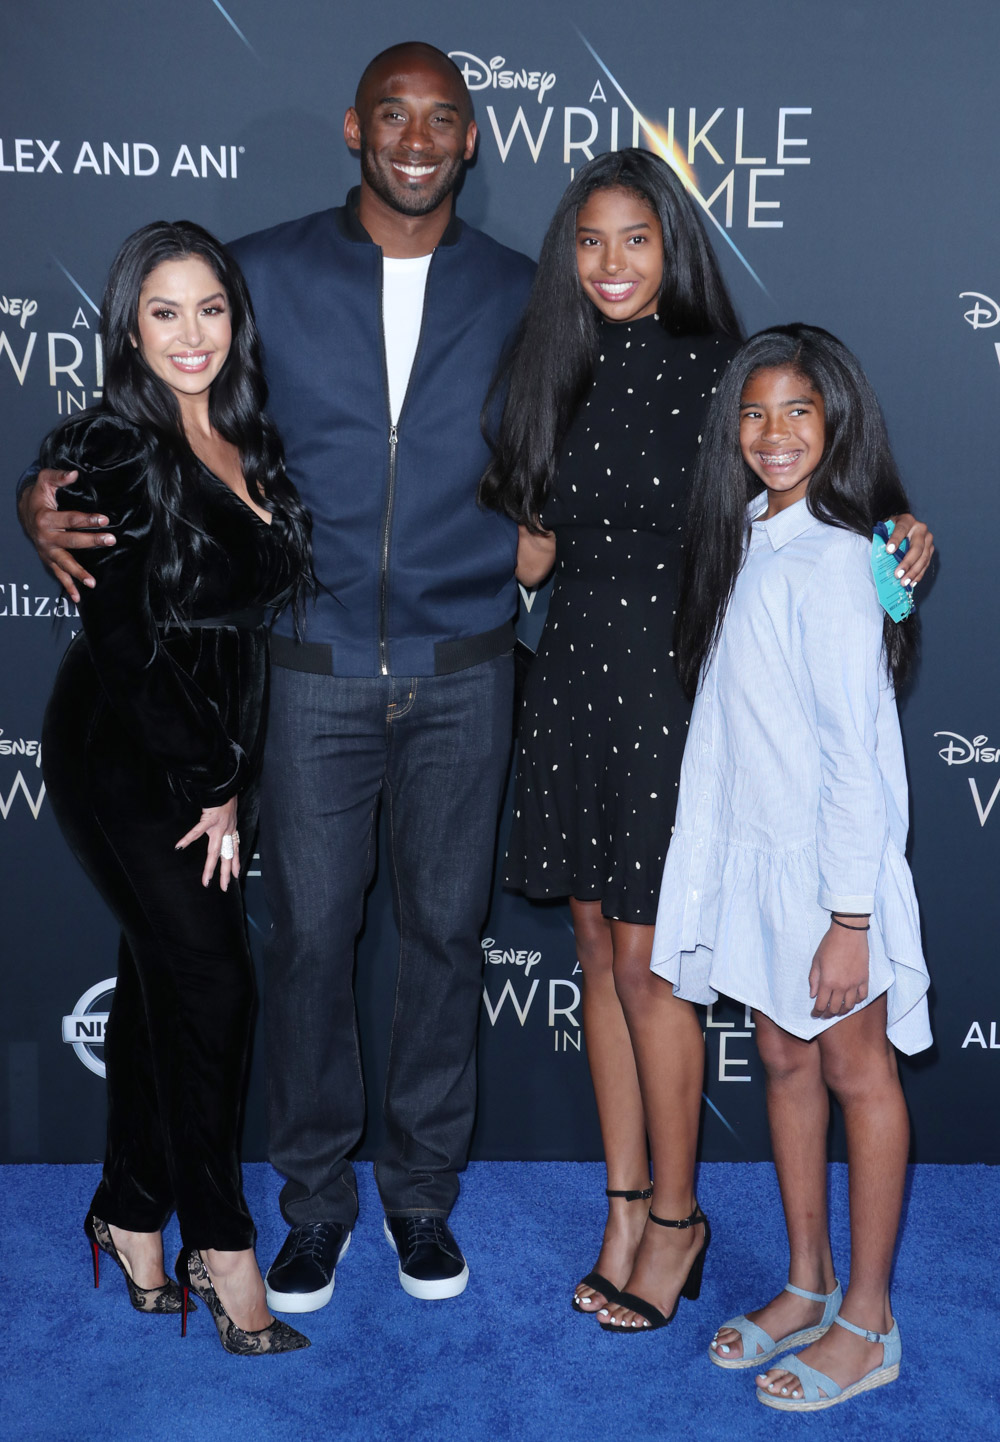 Kobe Bryant's Sweetest Moments With His Wife, Daughters: Pics